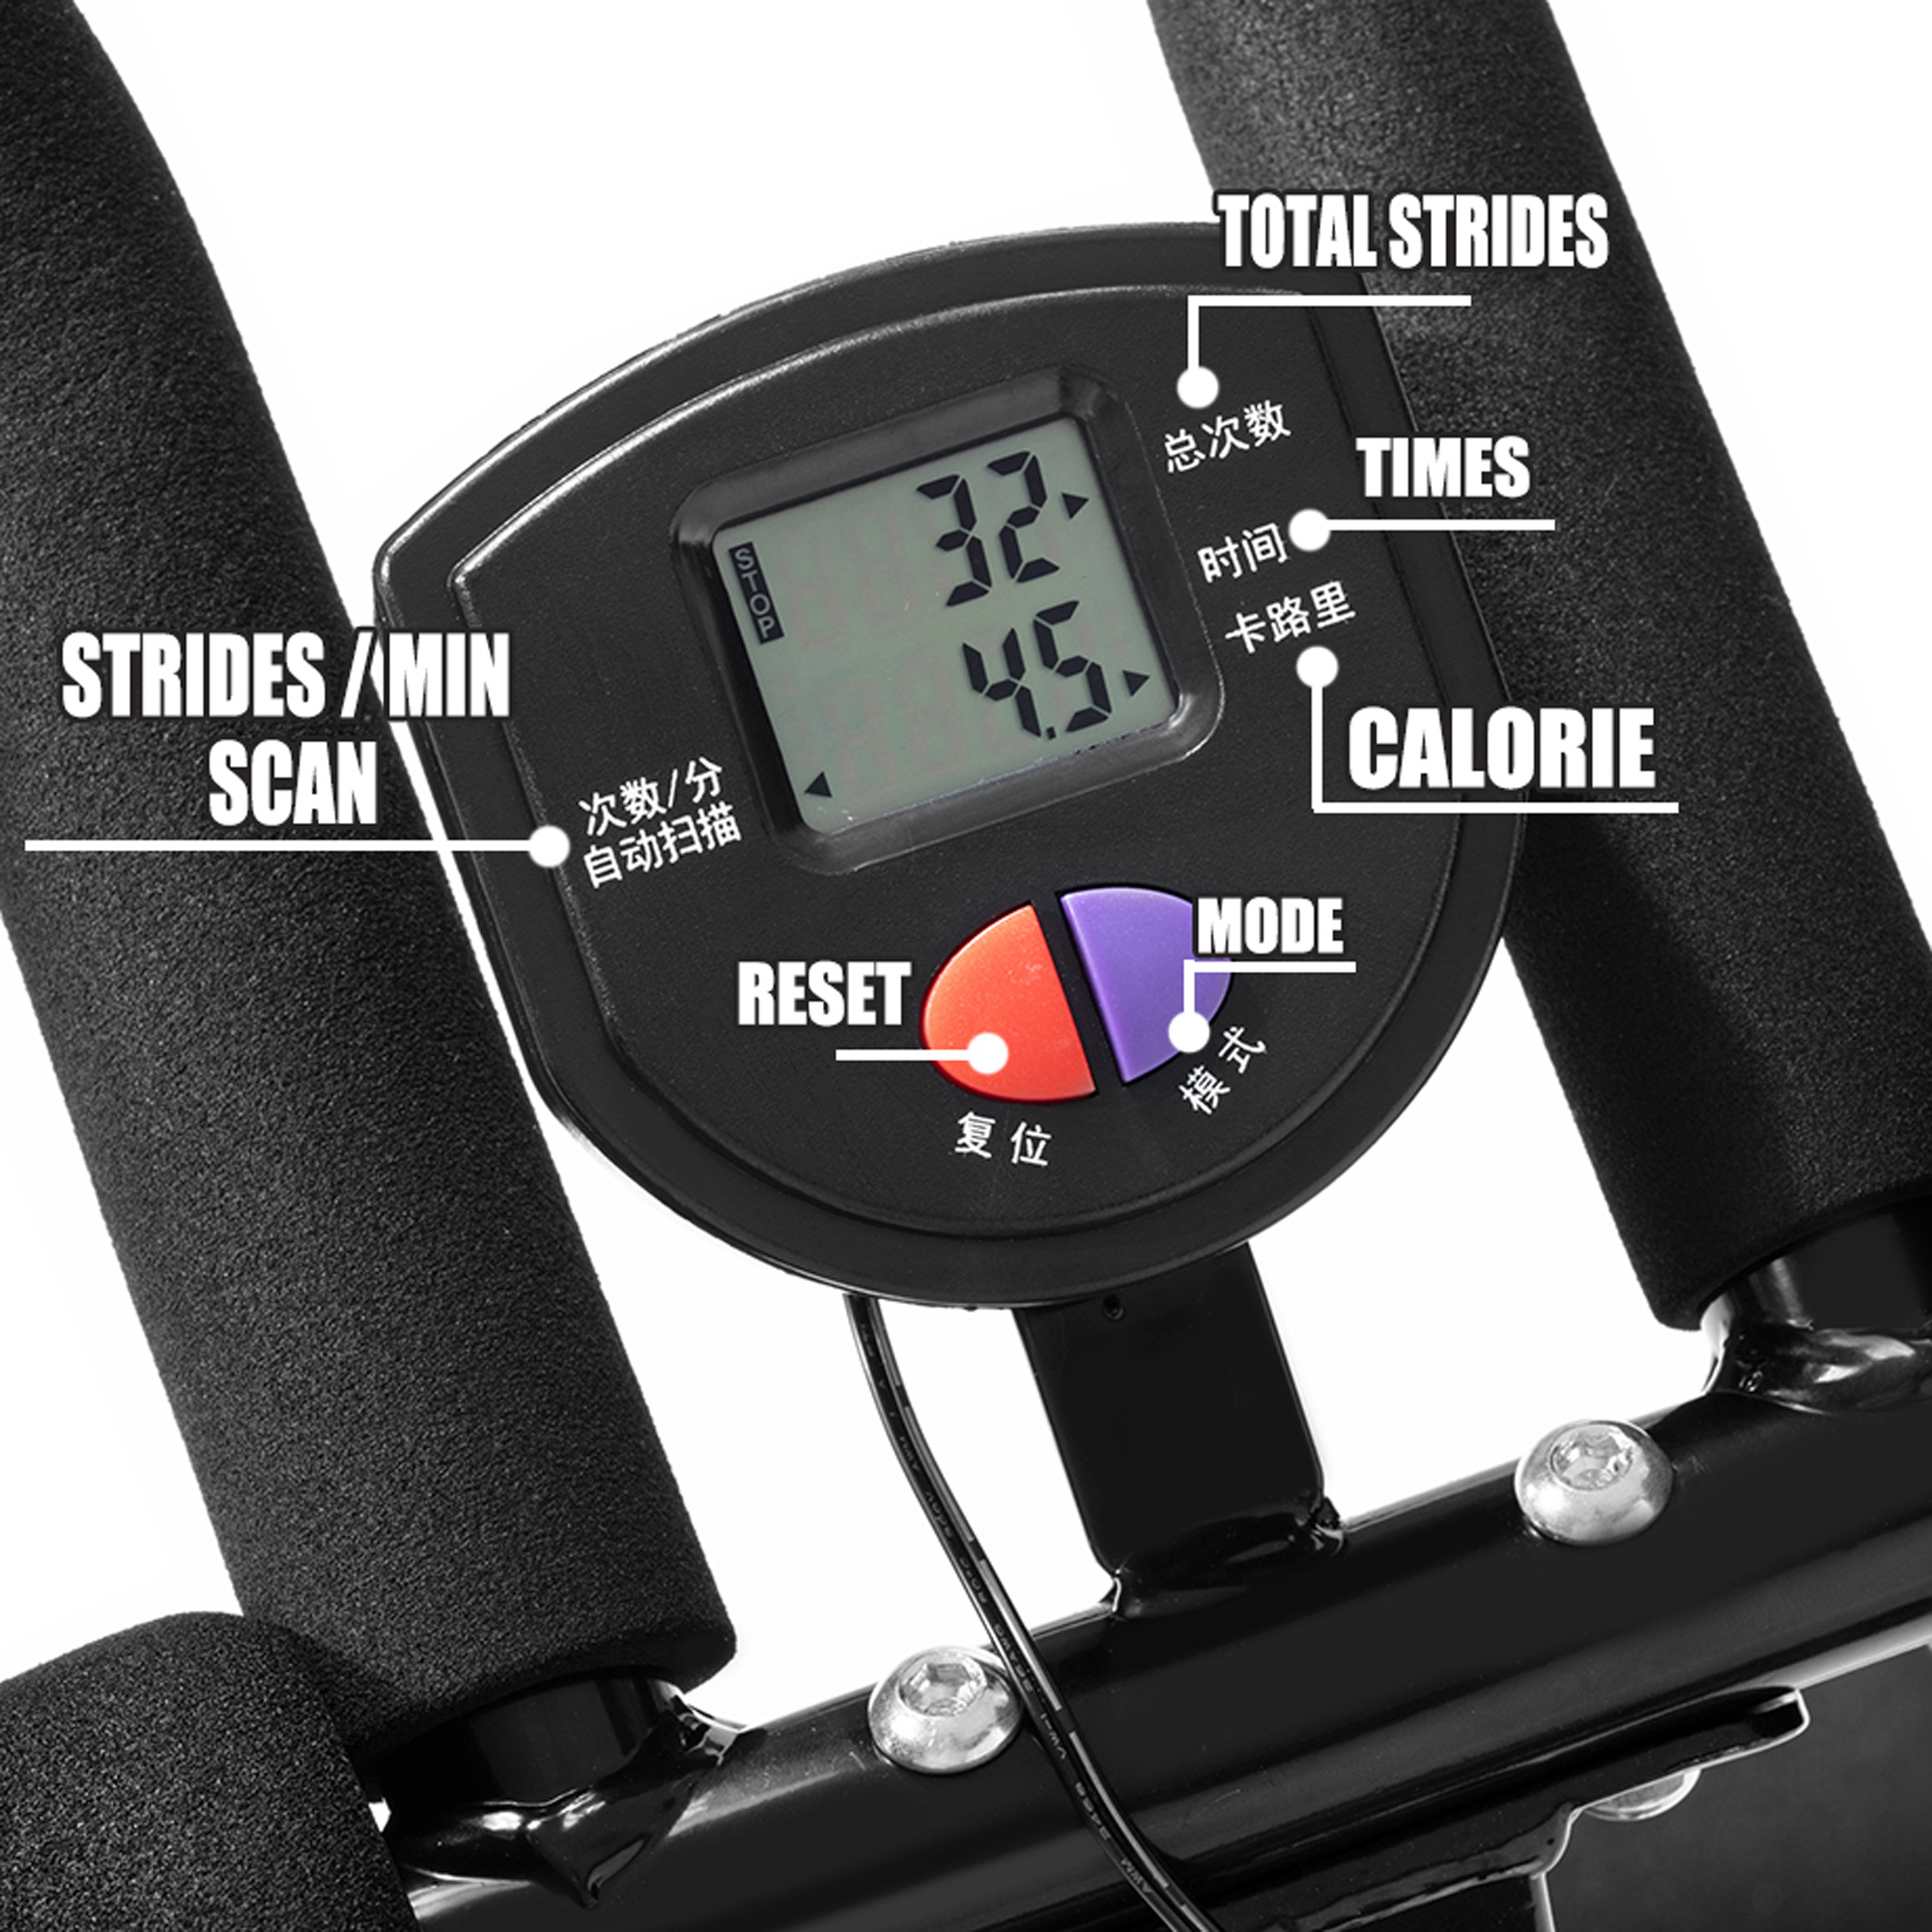 SAYFUT Roller Coaster Abdominal Machine Waist Fitness Equipment Abdomen Exercise Machine with LCD Display, for Home Gym Muscle Build Fitness Workout - image 5 of 7